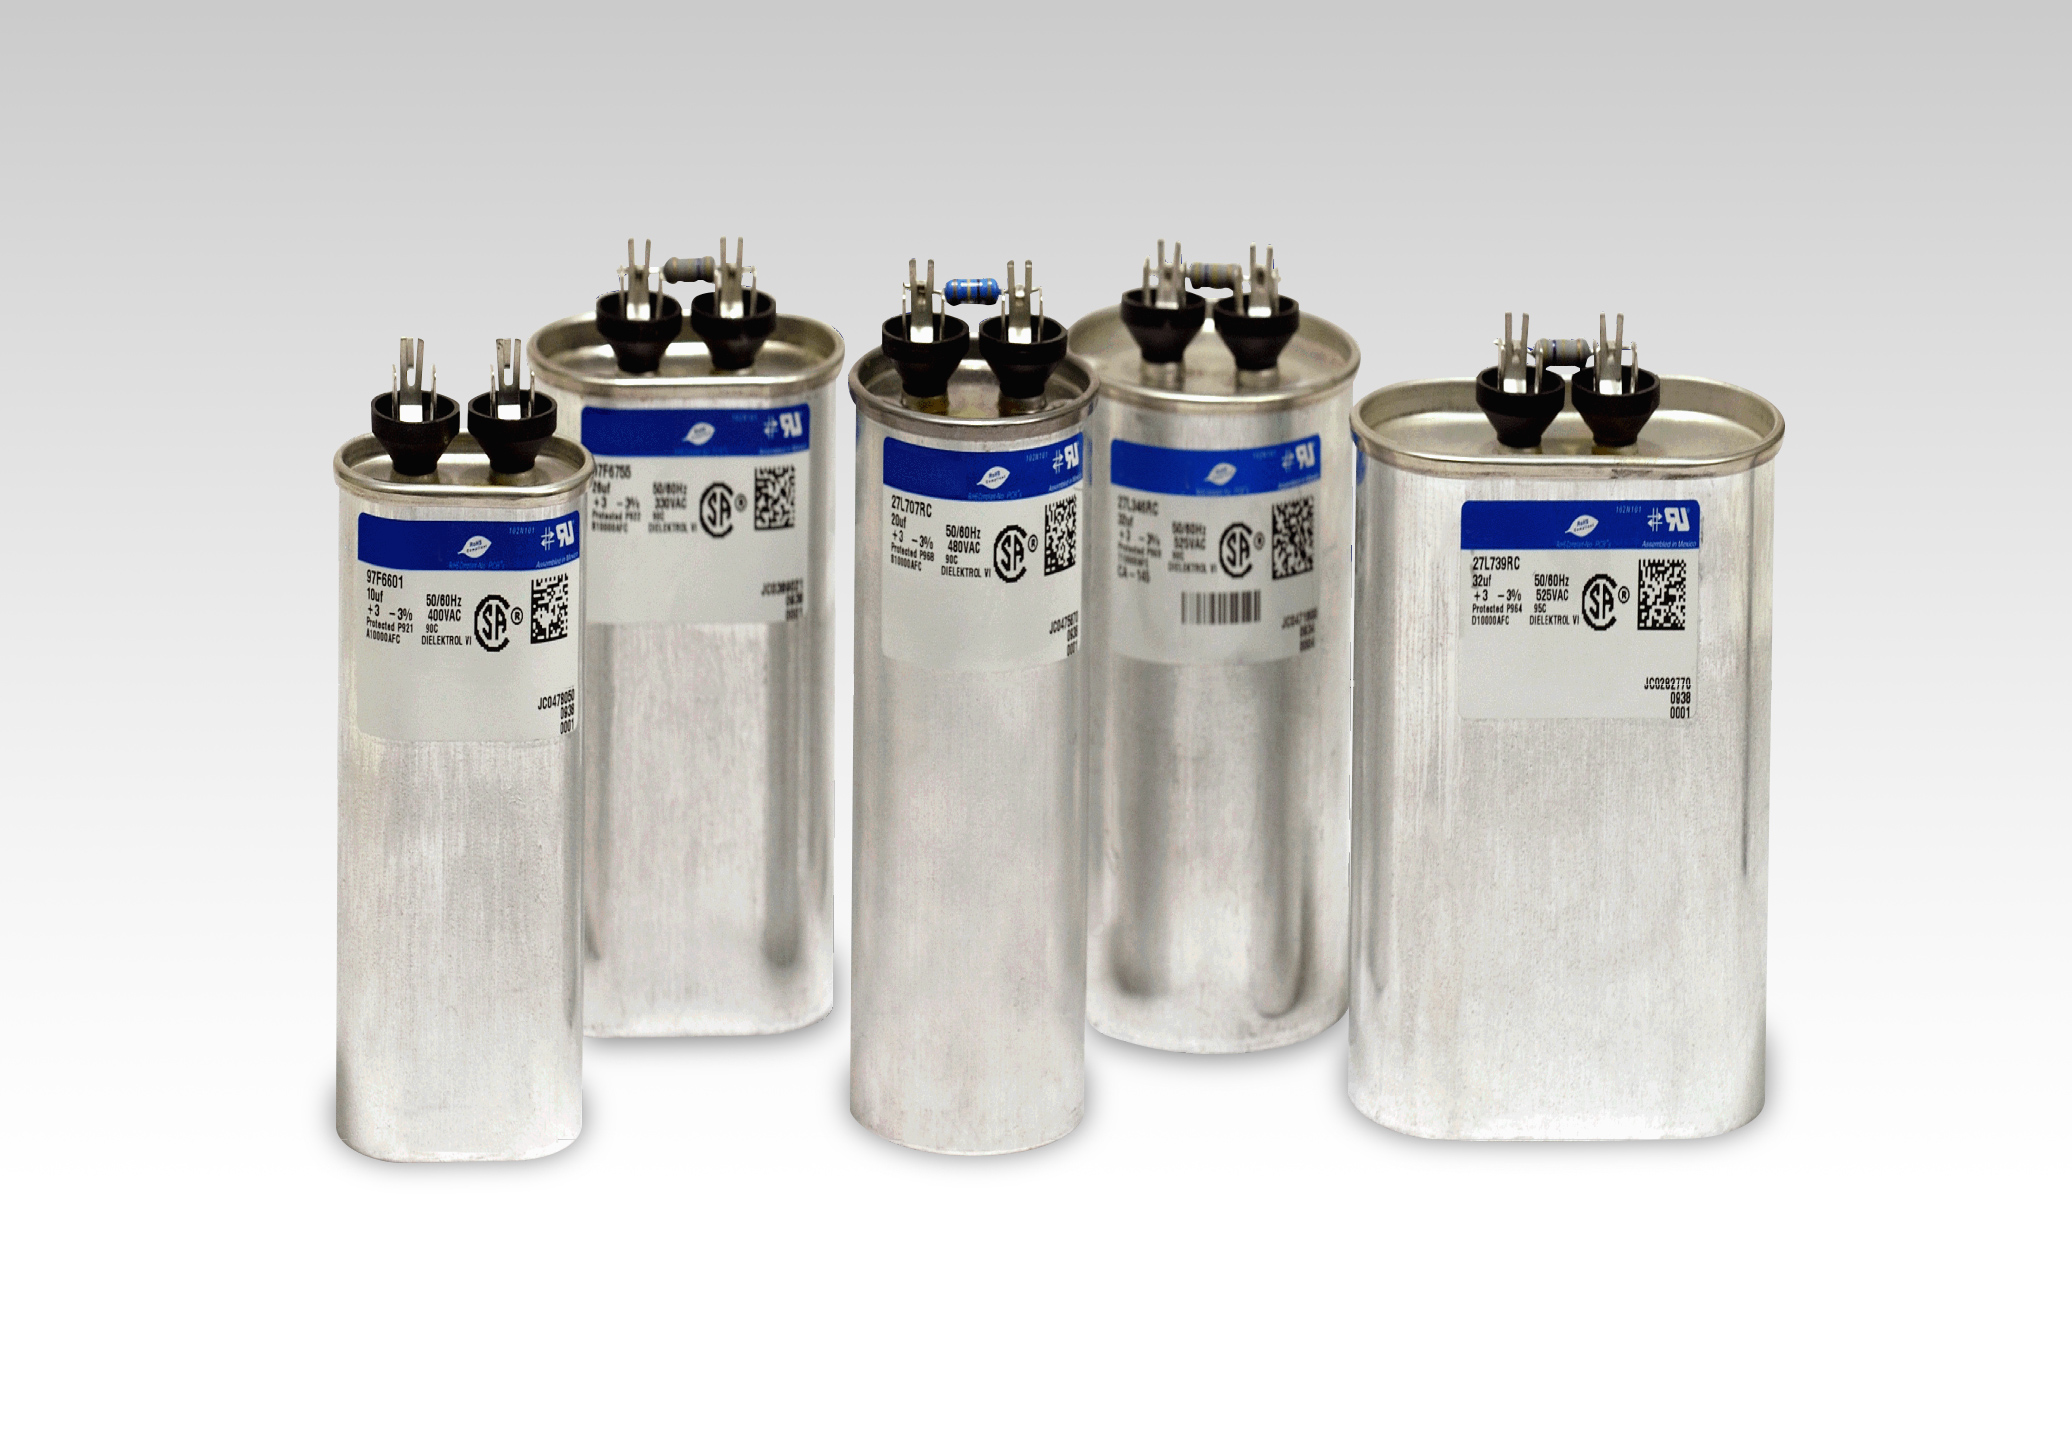 OIL FILLED CAPACITORS